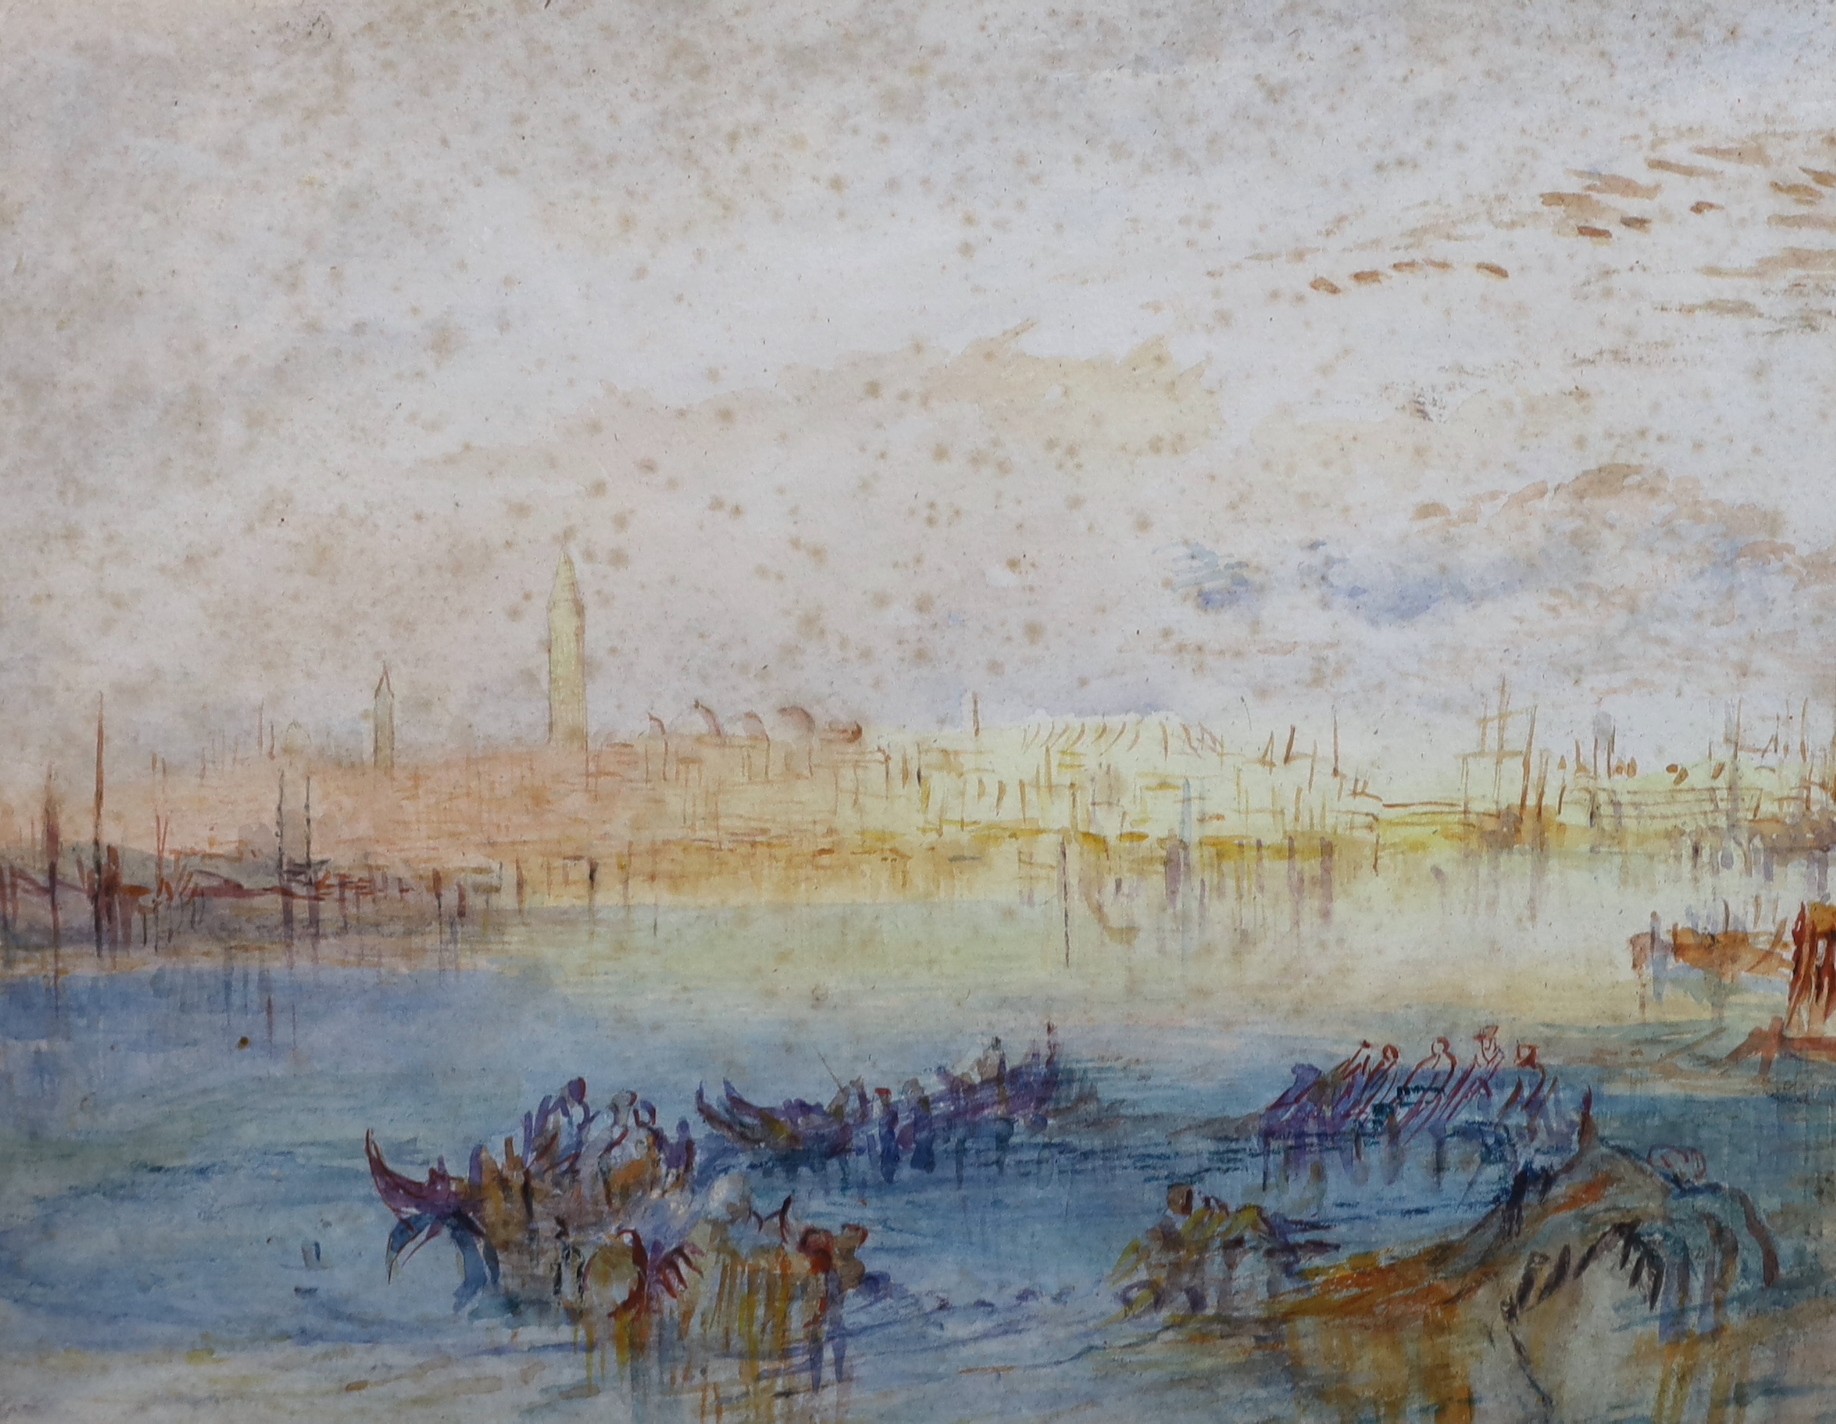 Follower of Joseph Mallord William Turner (British, 1775-1851), View of Venice from the Canale di San Marco with the Campanile and Domes of San Marco in the Distance, watercolour, 24 x 30cm